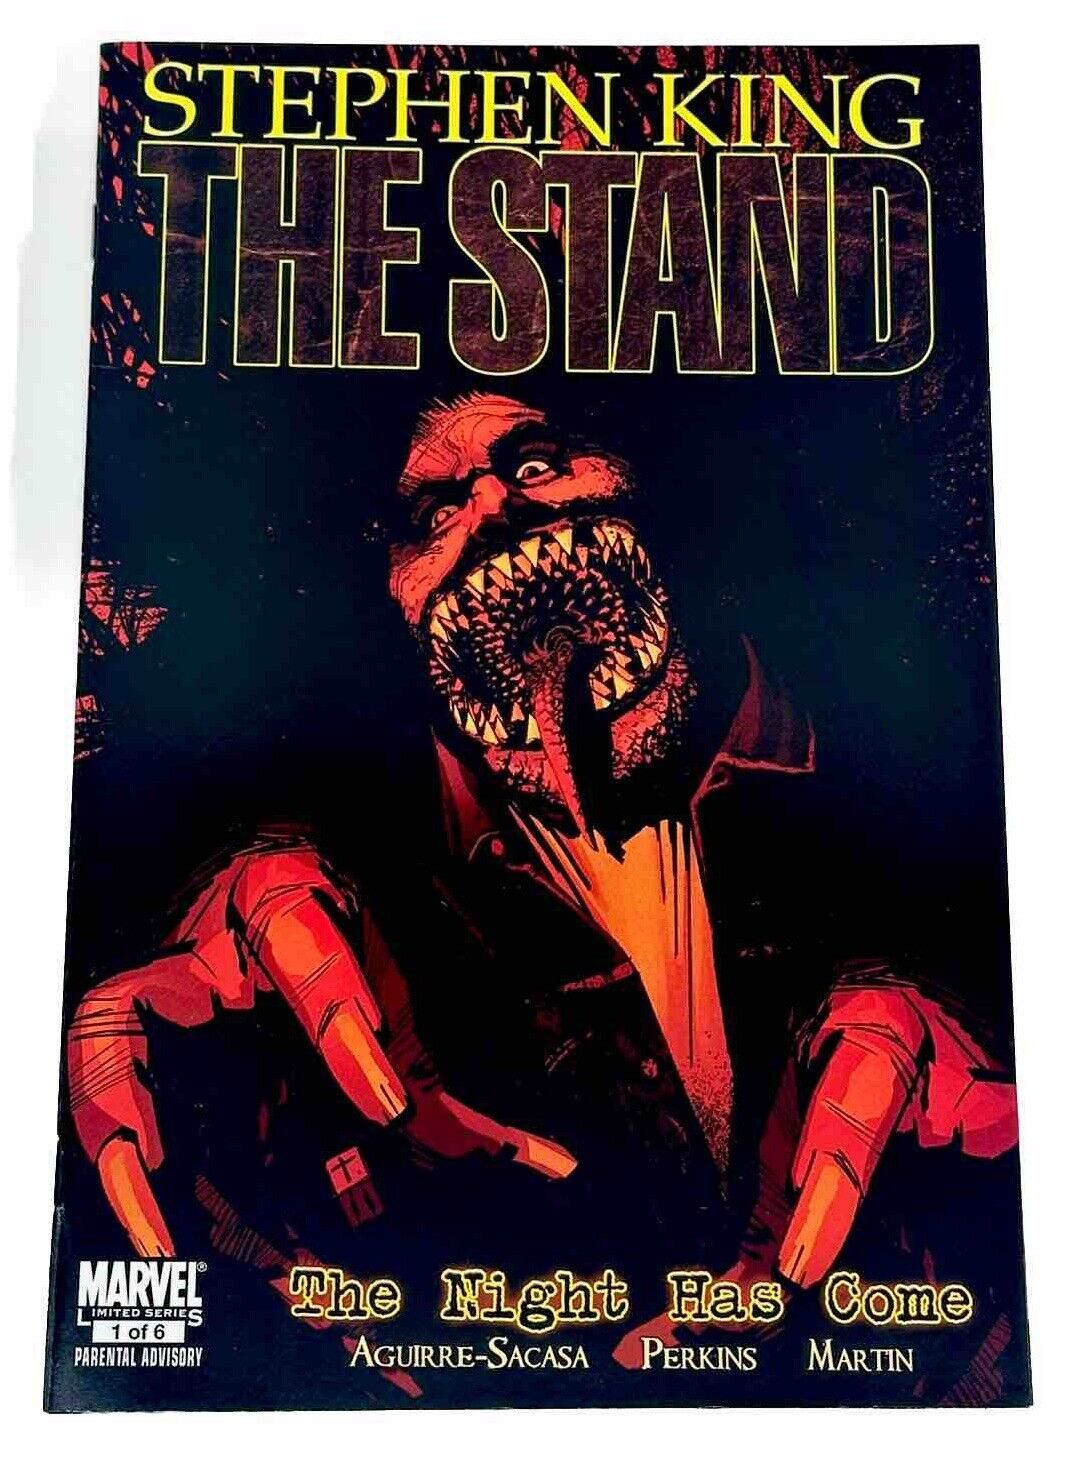 Stephen King’s The Stand: The Night Has Come #1 Marvel Comics, 2011 VGC L@@K